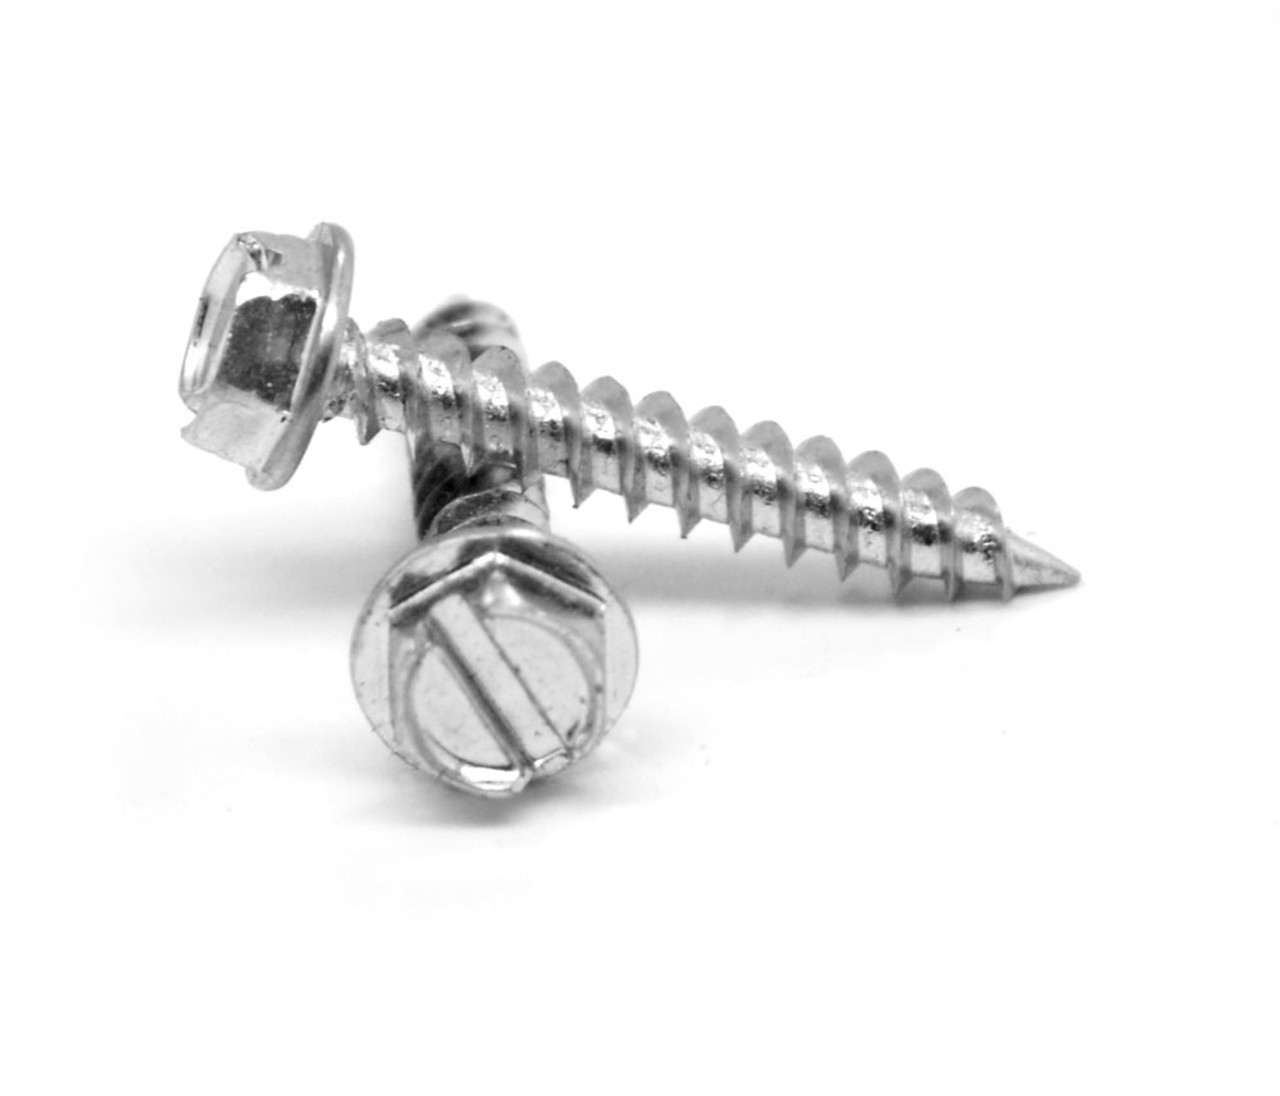 #10-16 x 3/4" (FT) 1/4" AF Self-Piercing Sheet Metal Screw Slotted Hex Washer Head Stainless Steel 18-8